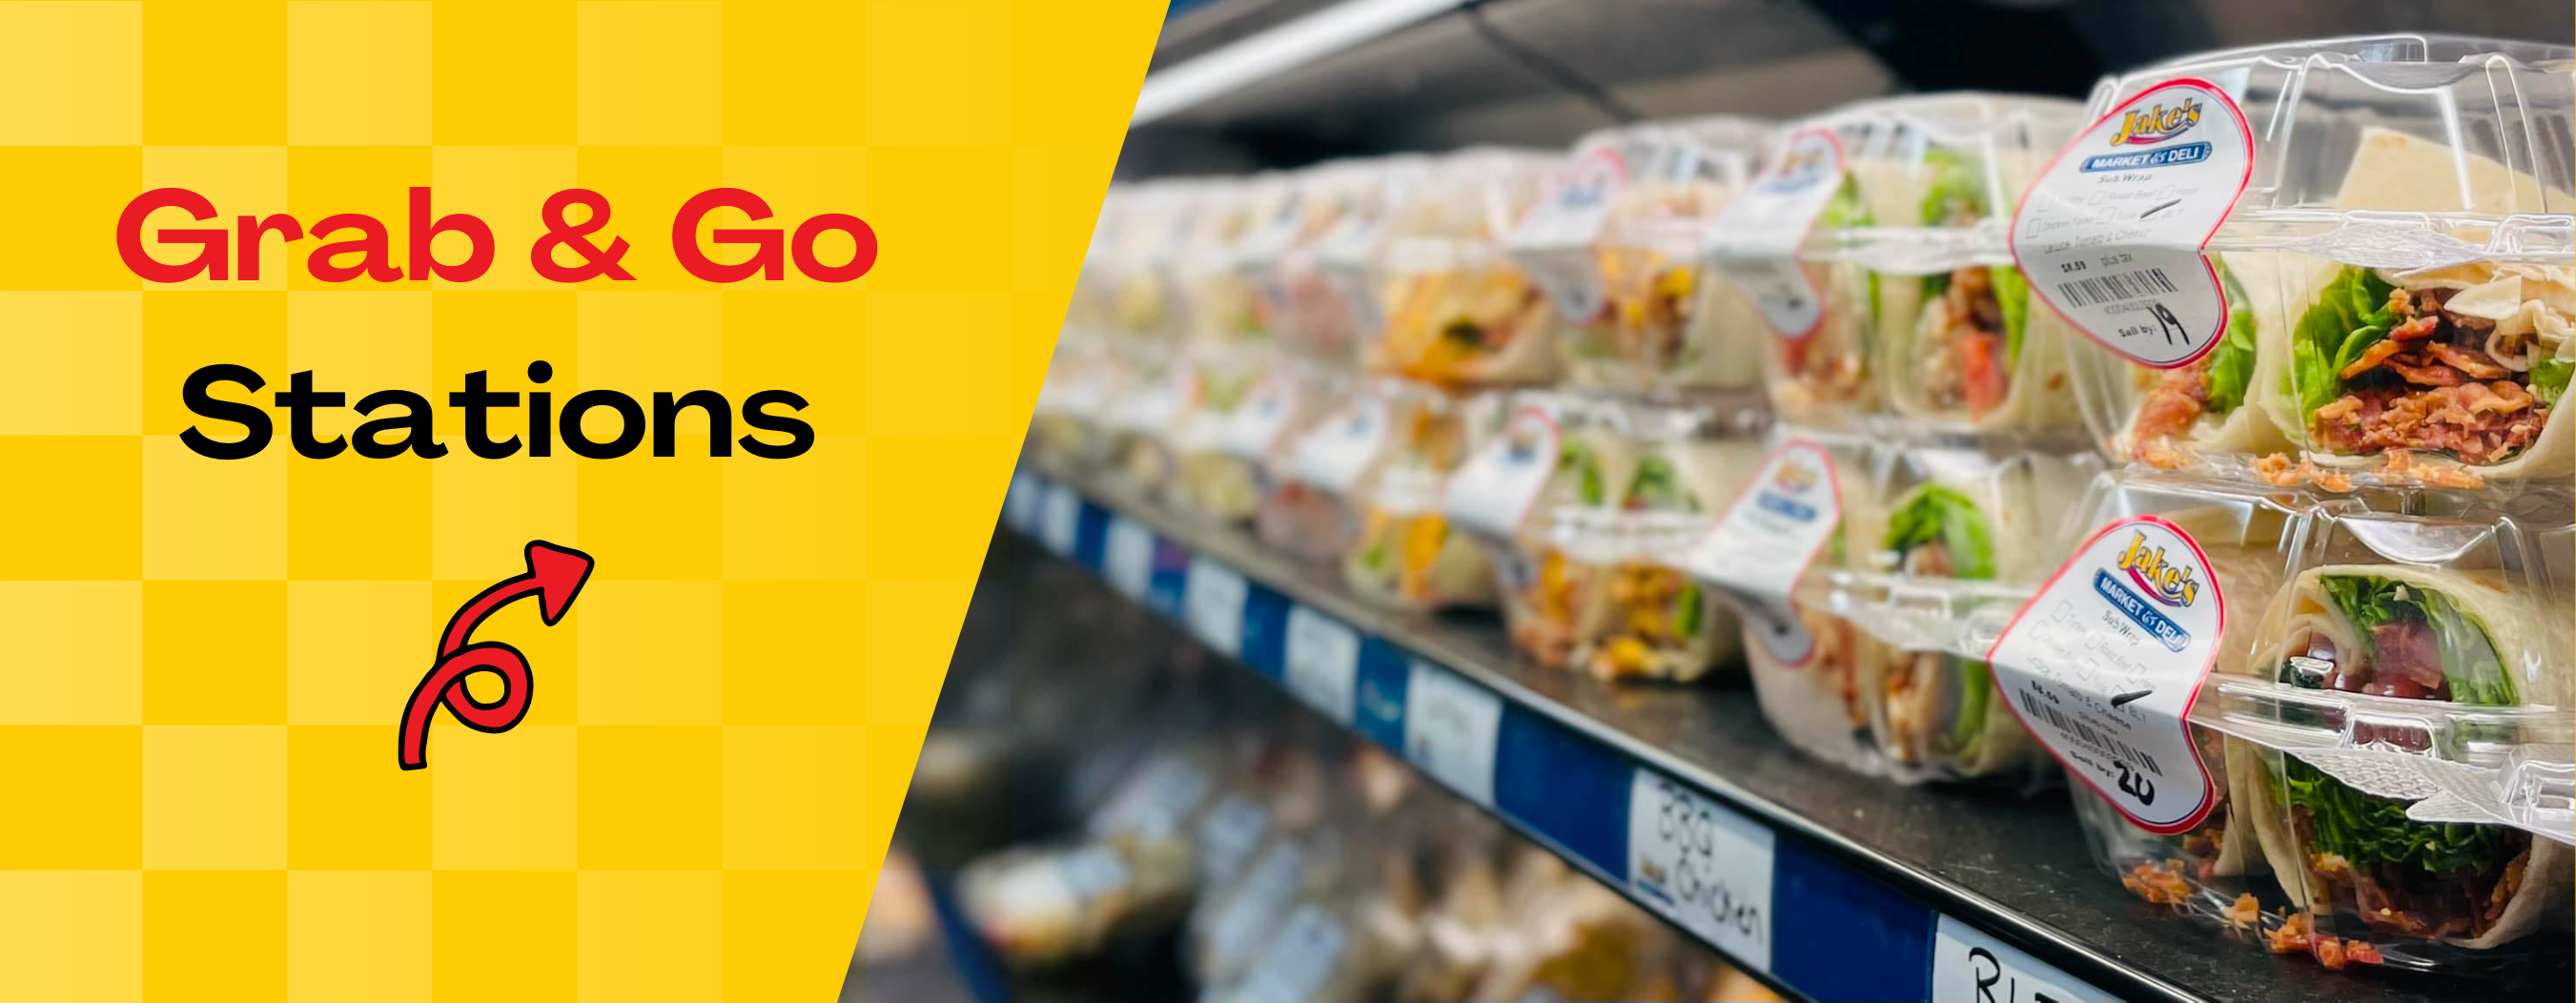 Grab-and-go prepared food display at convenience mart offering sandwiches, salads, and beverages for quick meals nearby